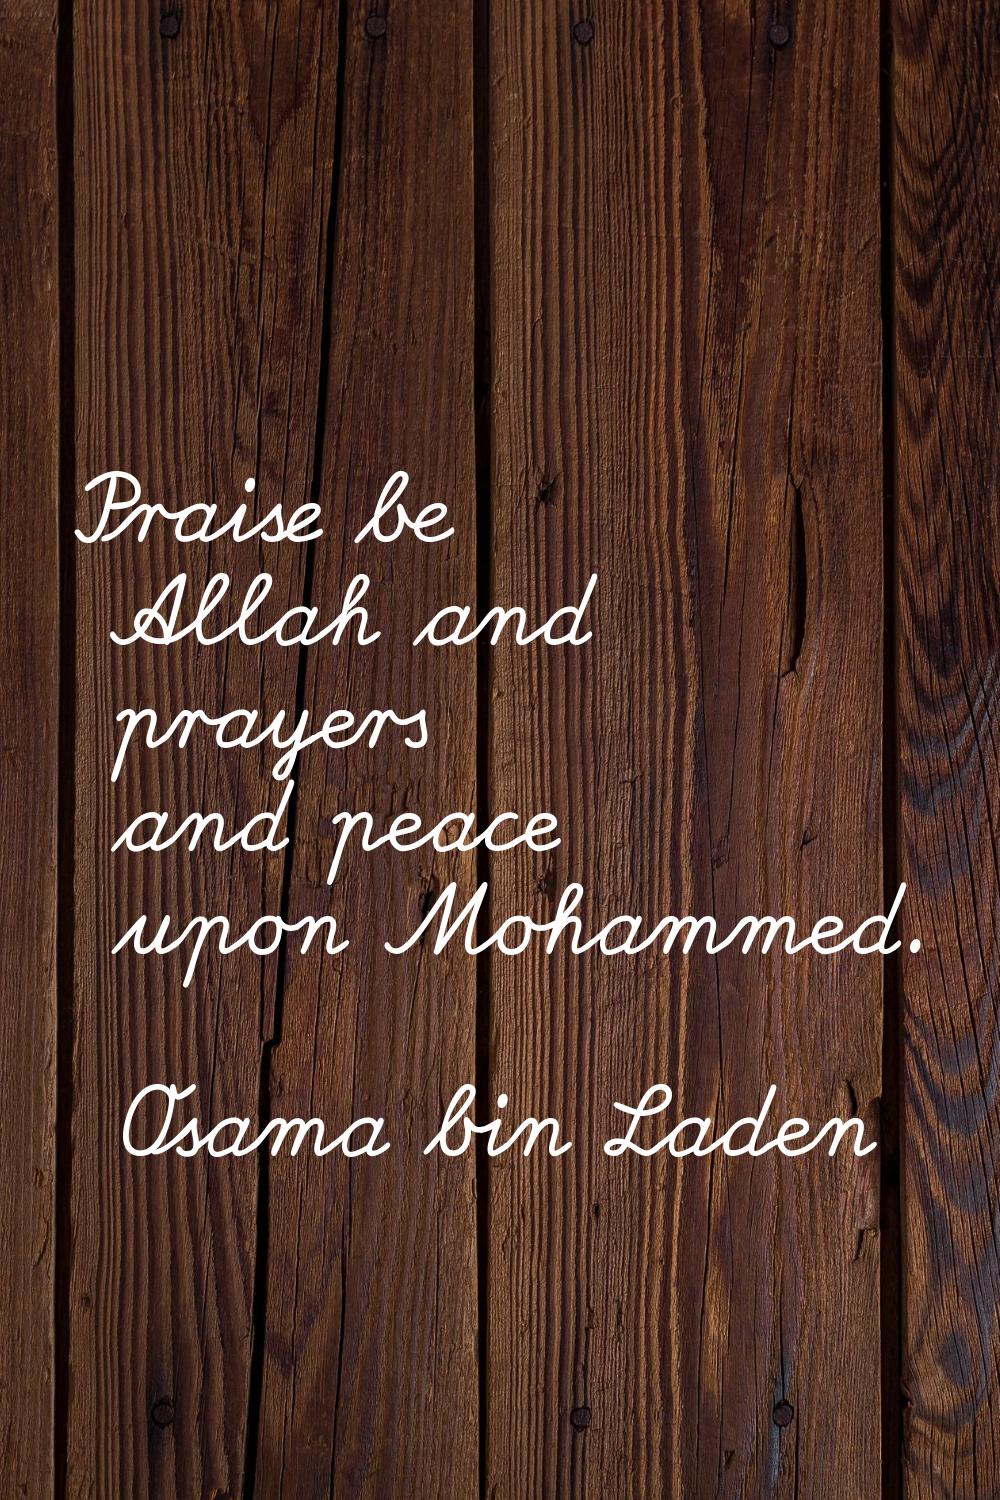 Praise be Allah and prayers and peace upon Mohammed.